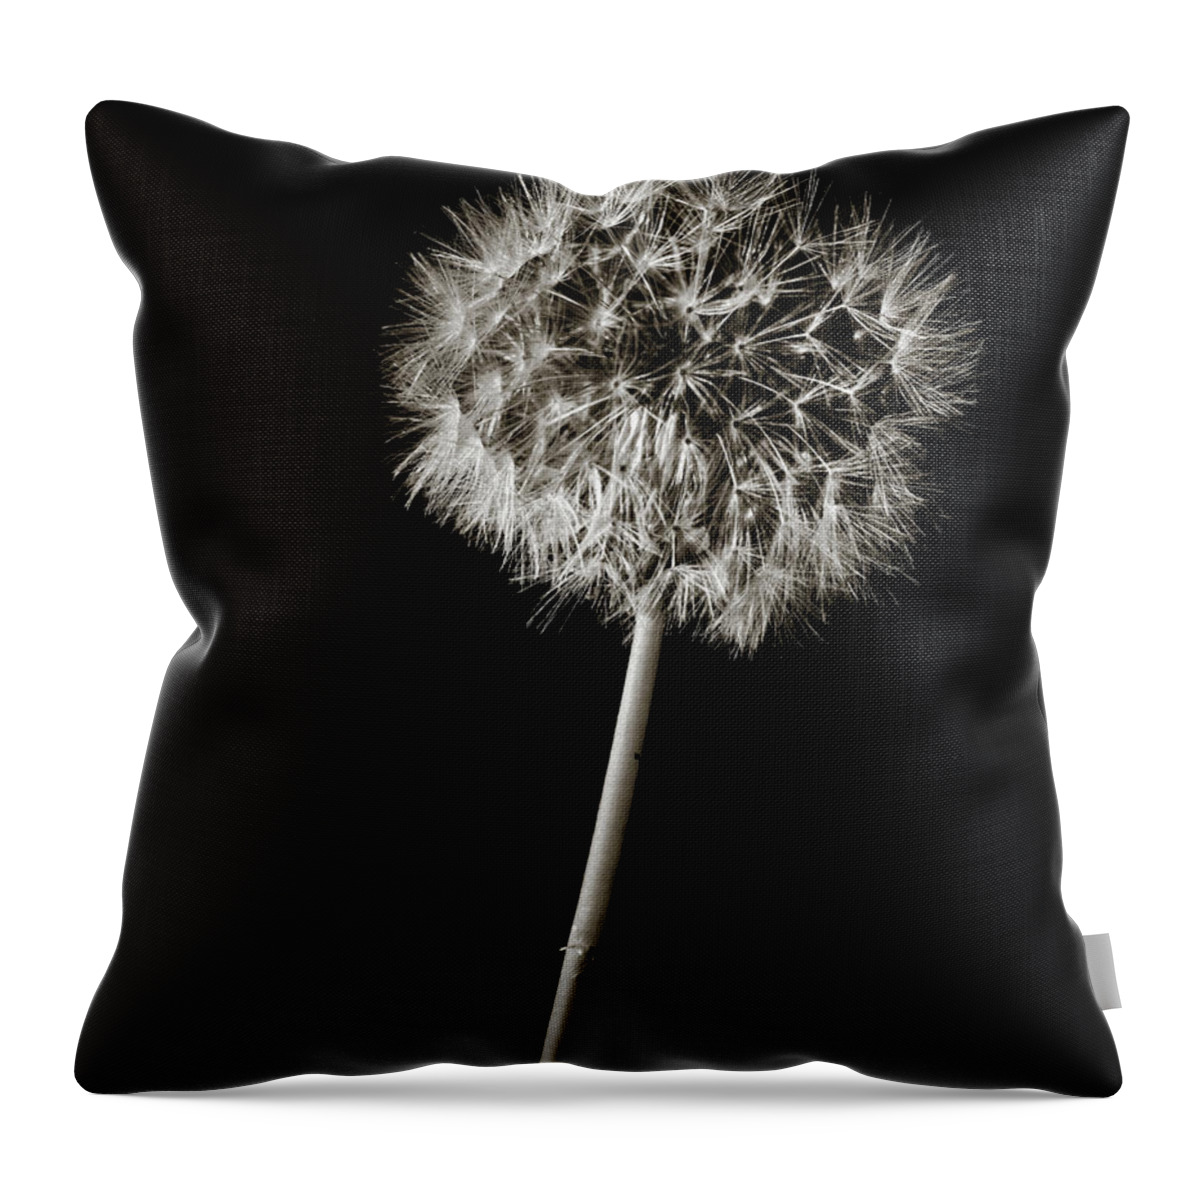 Dandelion Throw Pillow featuring the photograph Dandelion Wld Flower 220.2107 by M K Miller